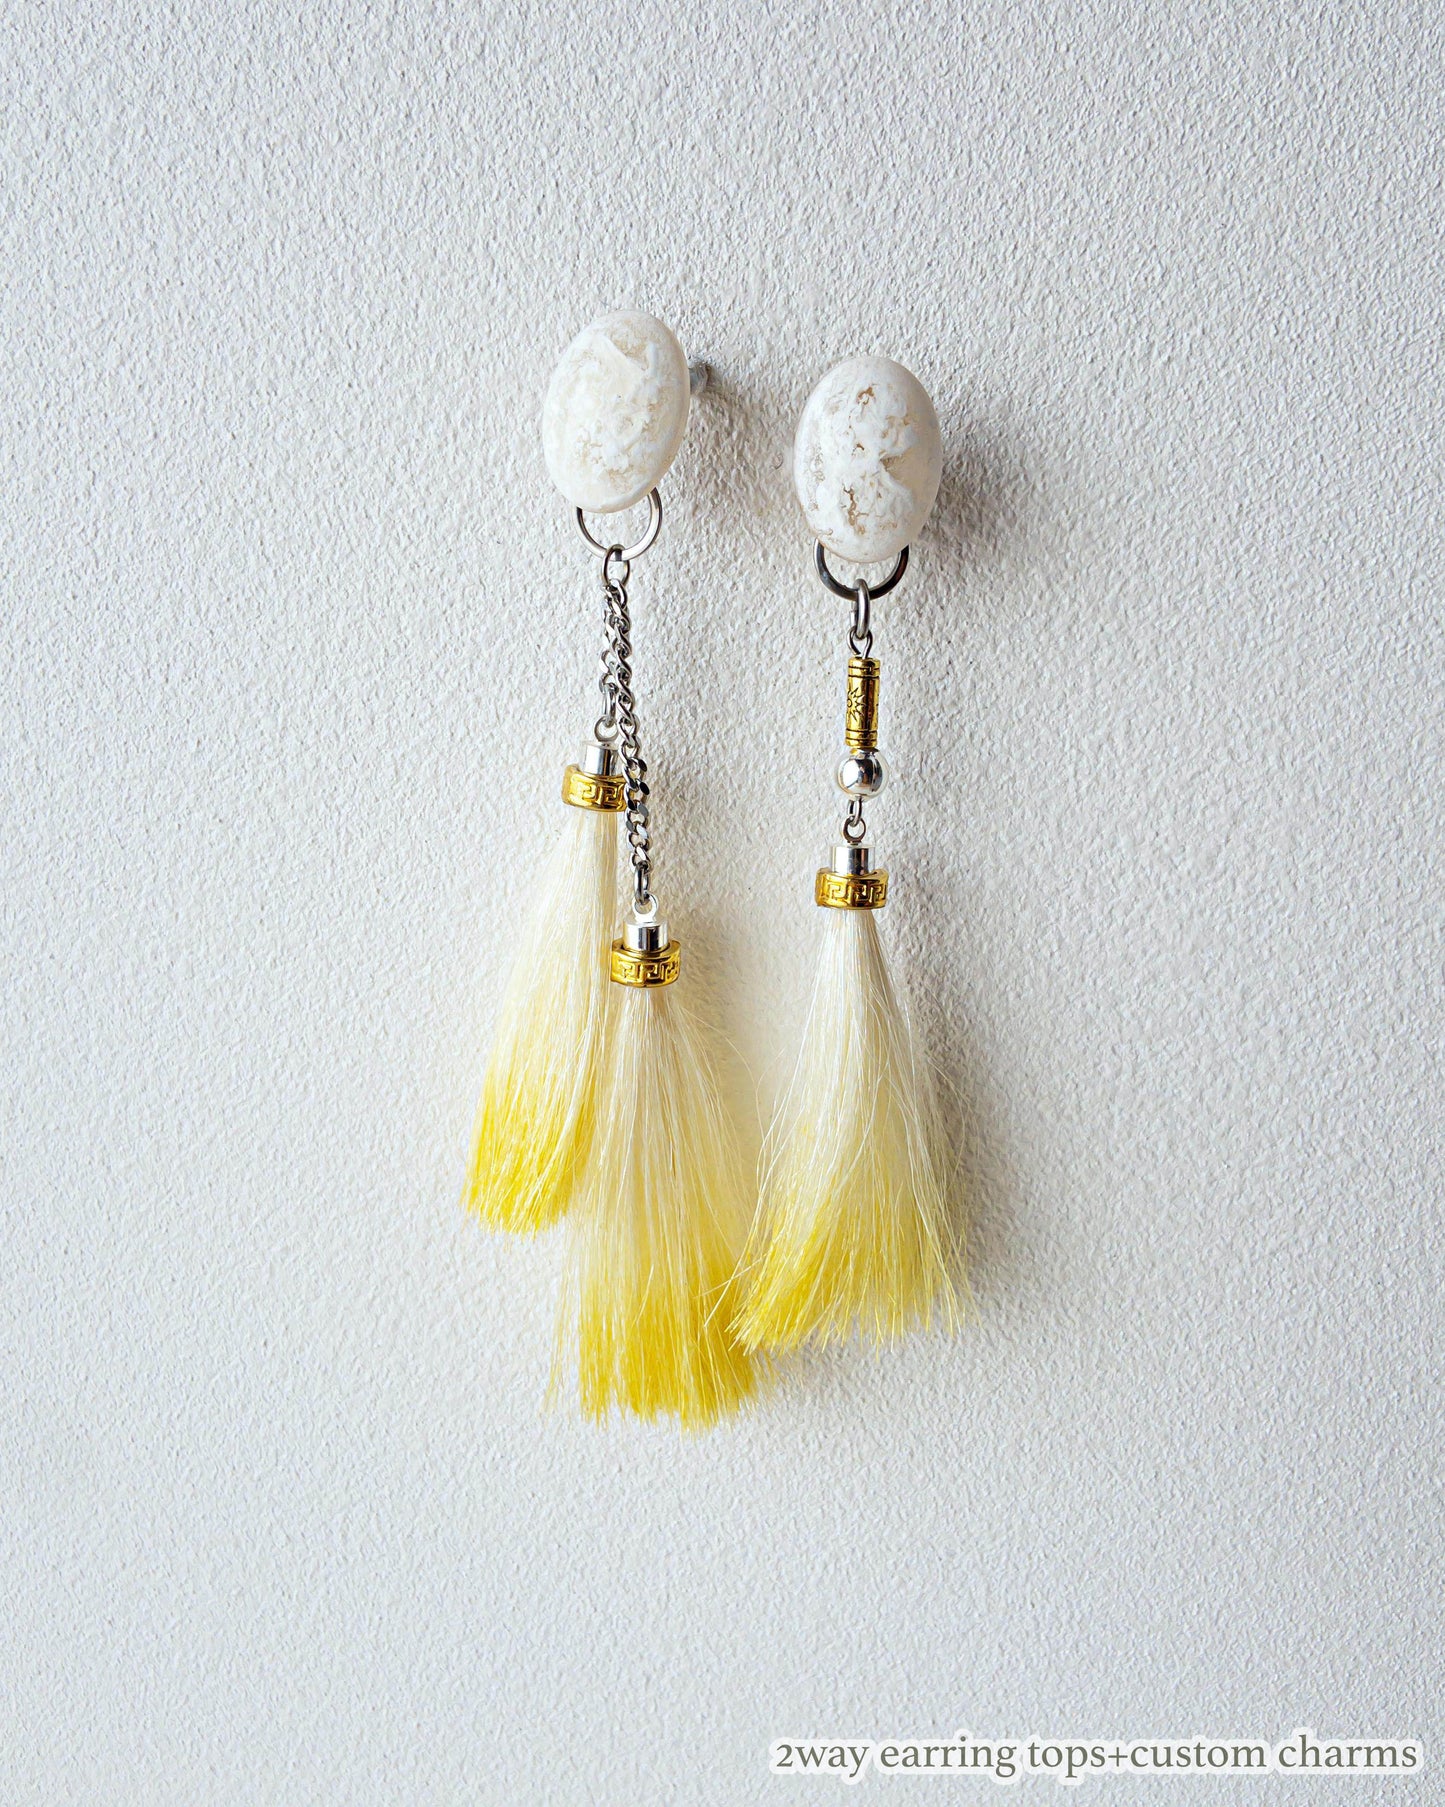 Custom charms/Interchangeable/dress-up charms/horse hair yellow